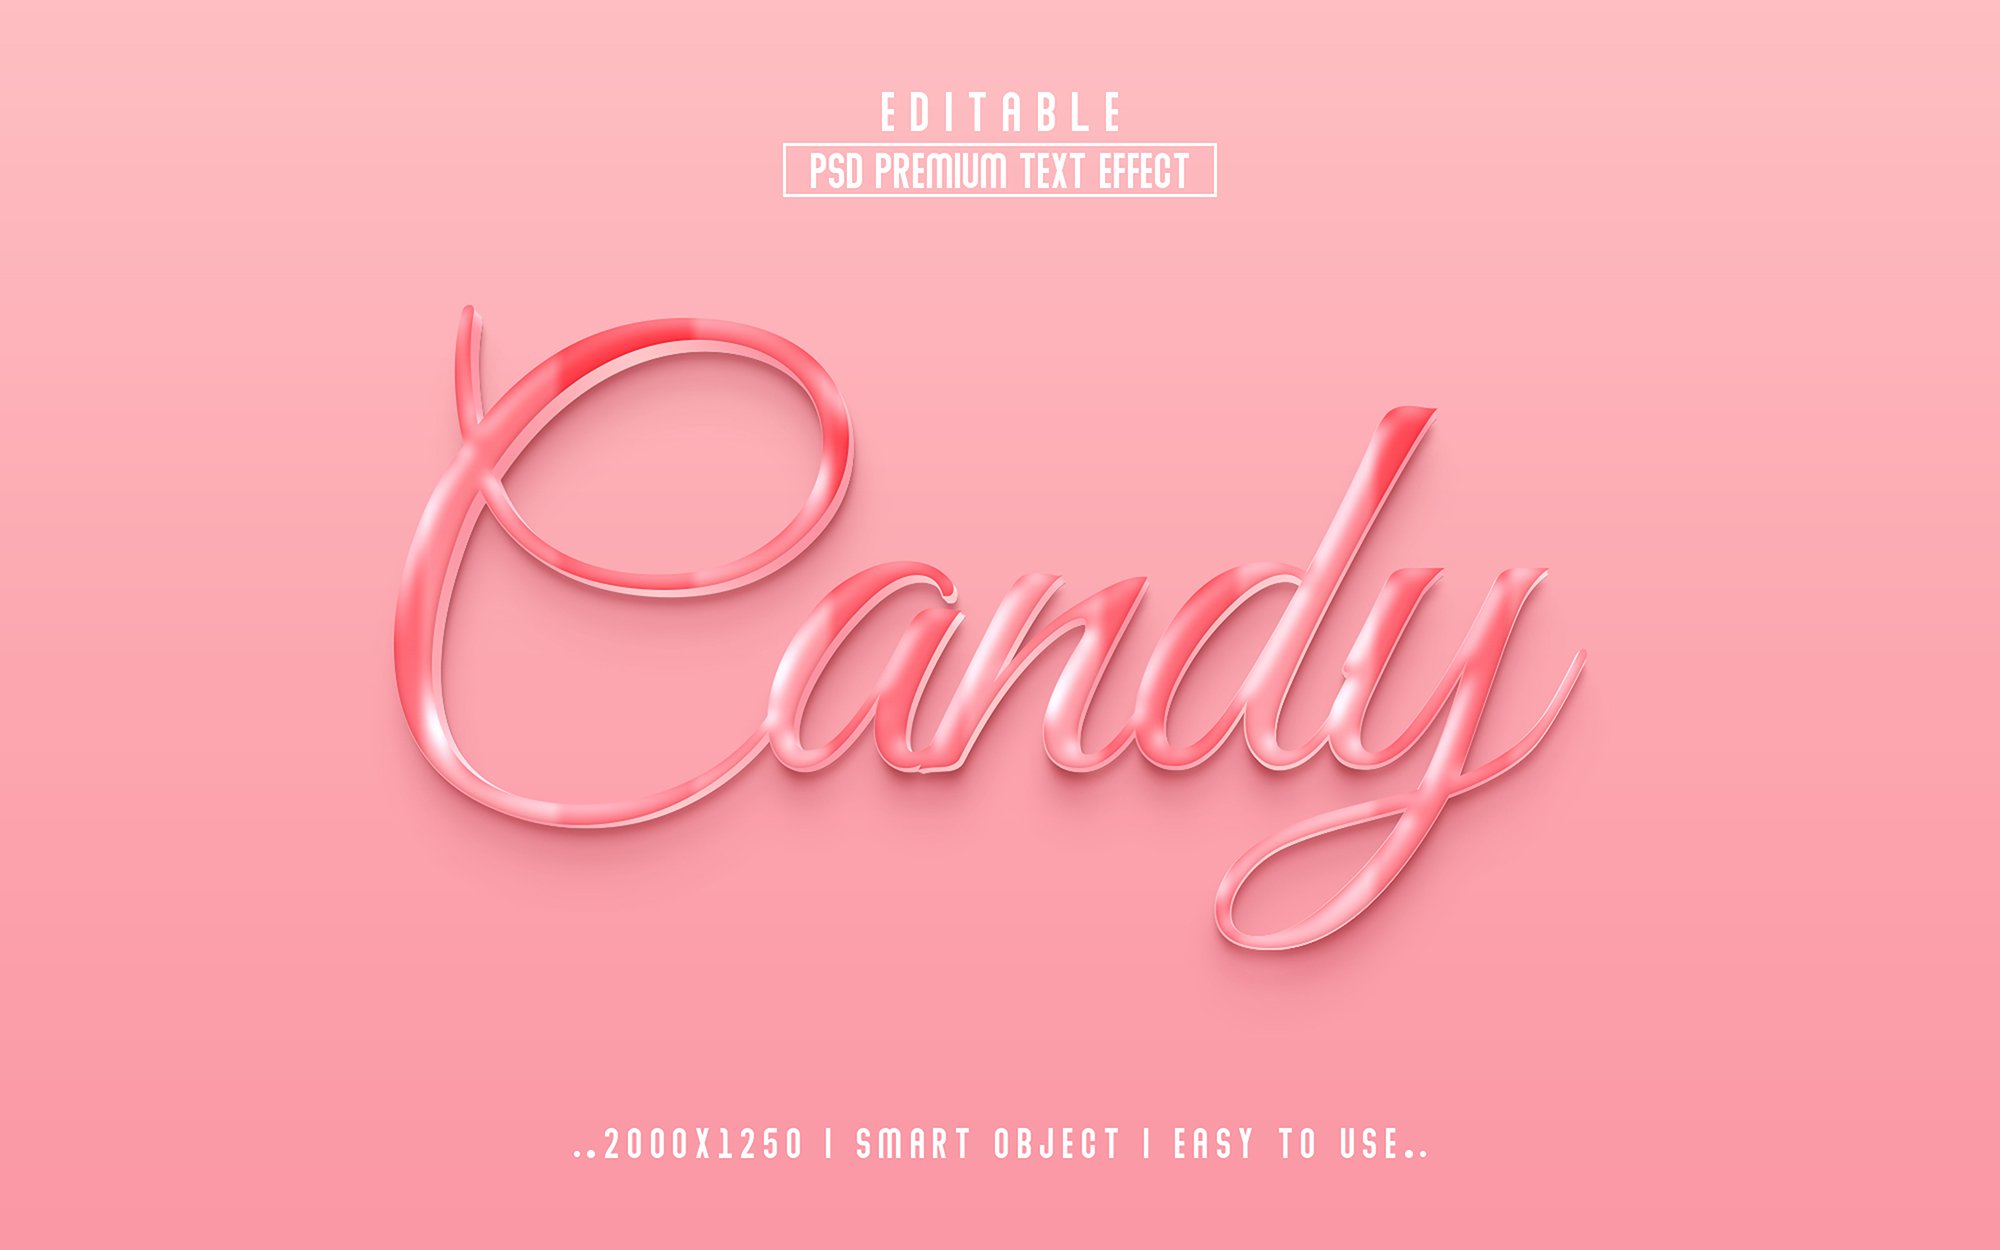 Candy 3D Editable psd Text Effectcover image.